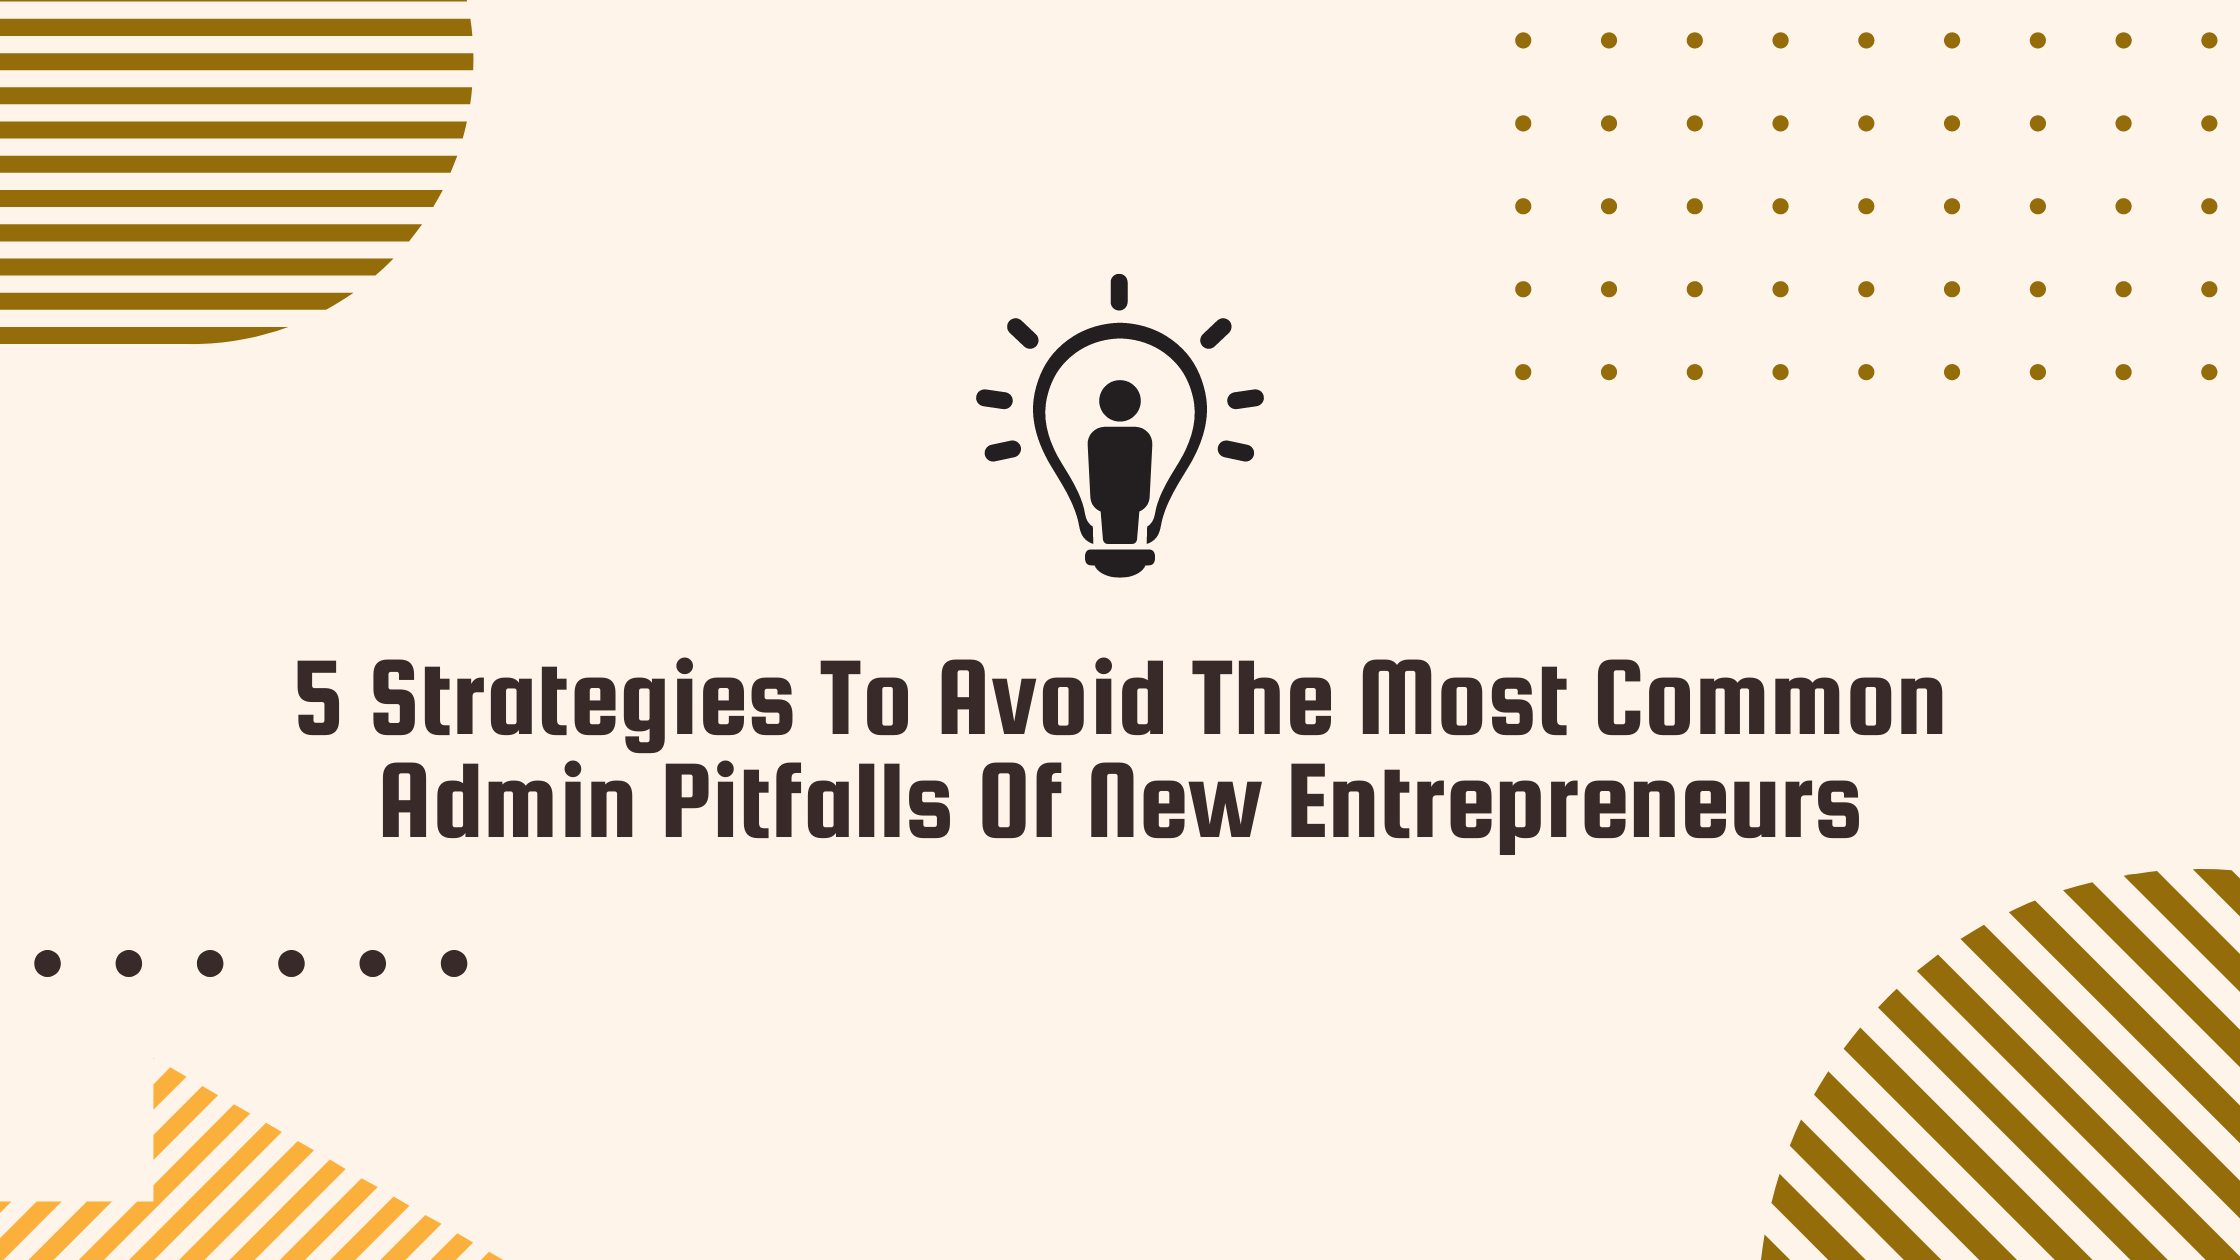 5 strategies to avoid the most common admin pitfalls of new entrepreneurs | bookafy